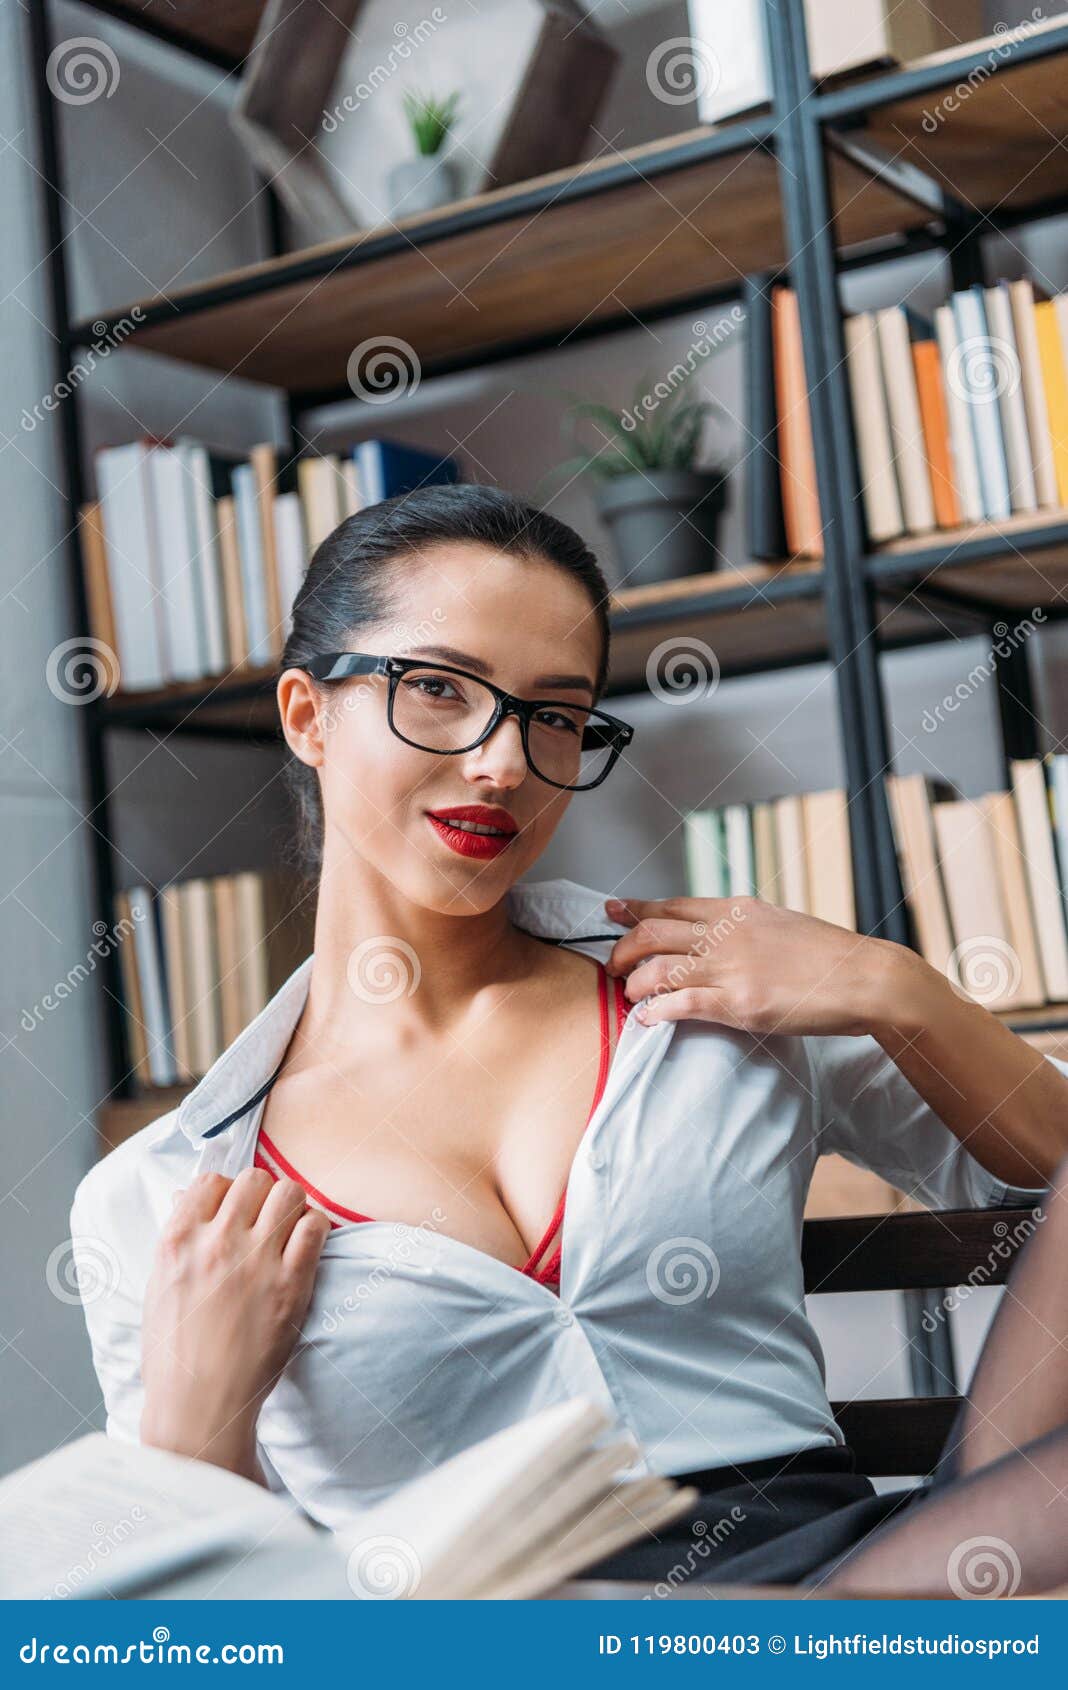 catherine mathieu recommends big boobs in library pic